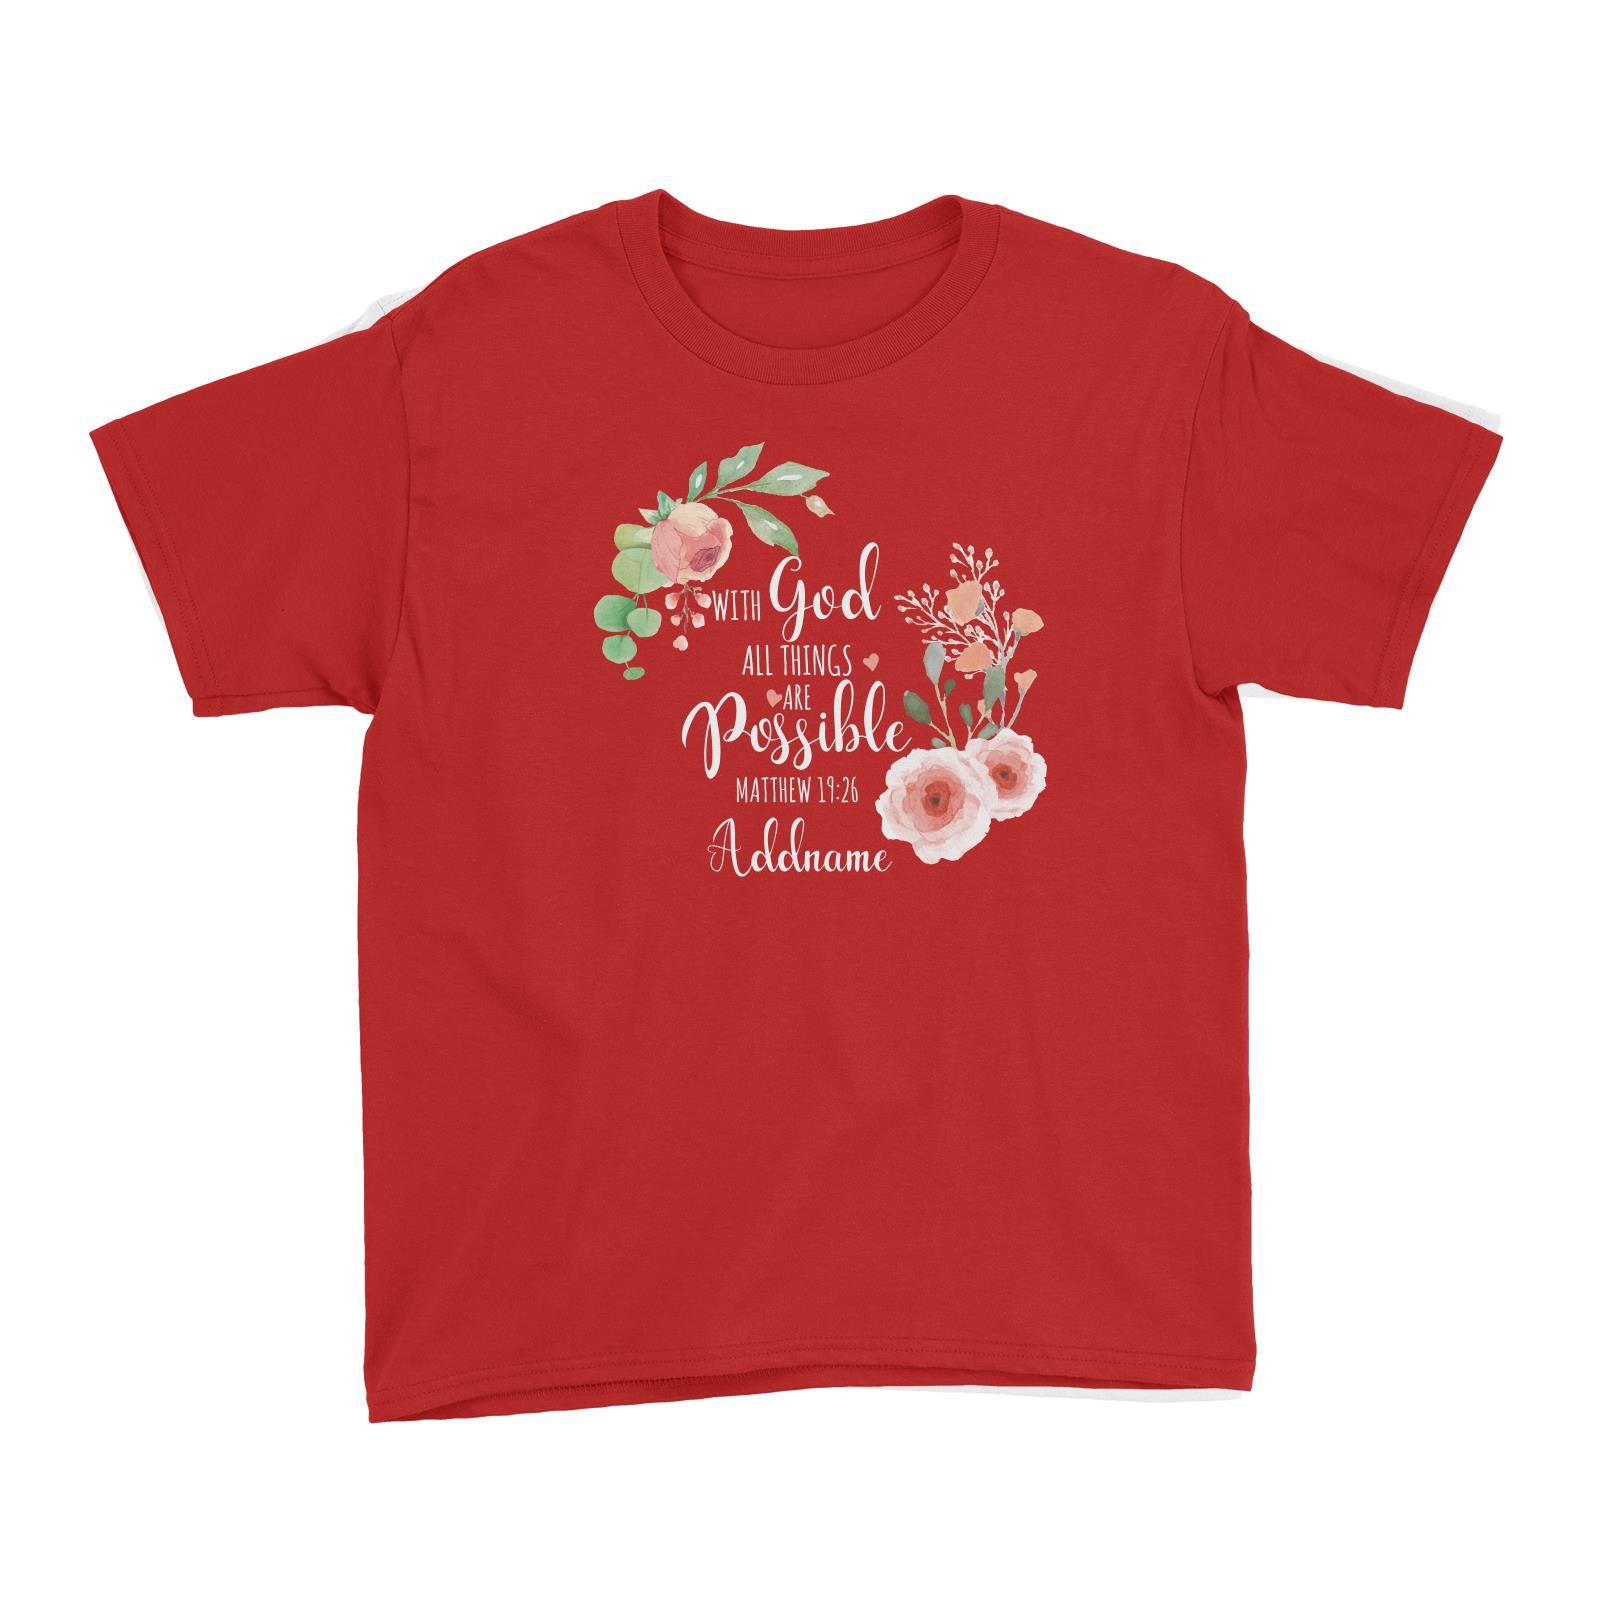 Gods Gift With God All Things Are Possible Matthew 19.26 Addname Kid's T-Shirt